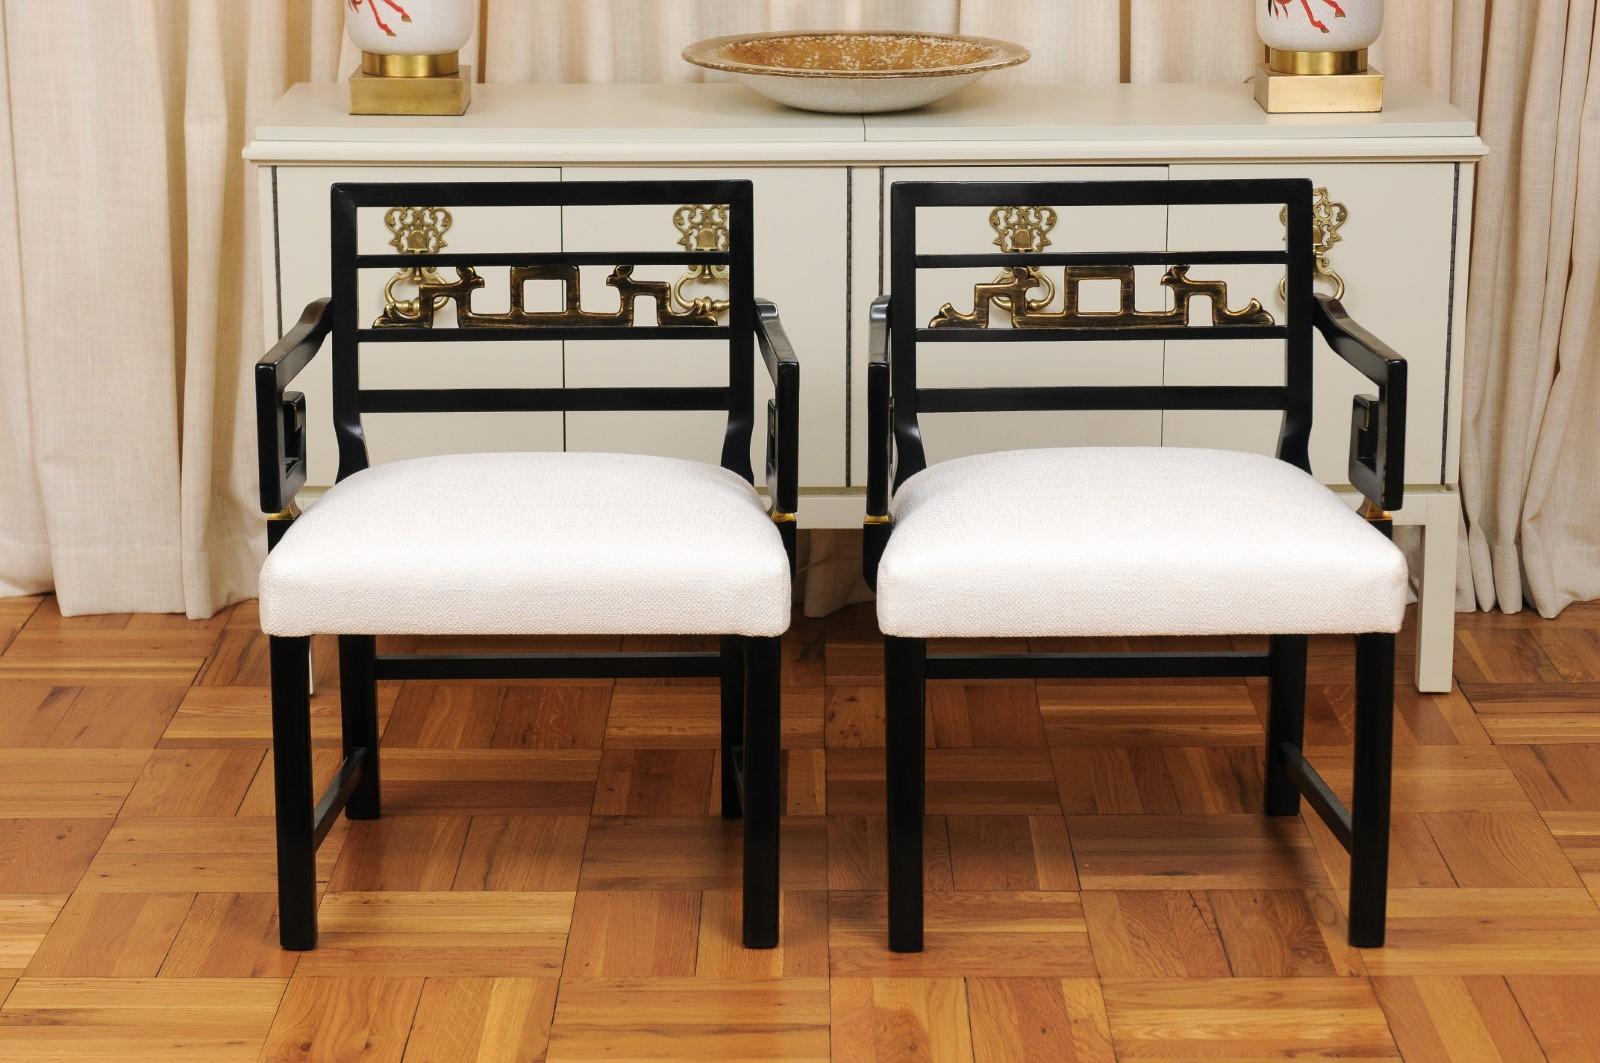 Mid-20th Century Exquisite Pair of Modern Chinoiserie Greek Key Armchairs by Baker, circa 1960 For Sale